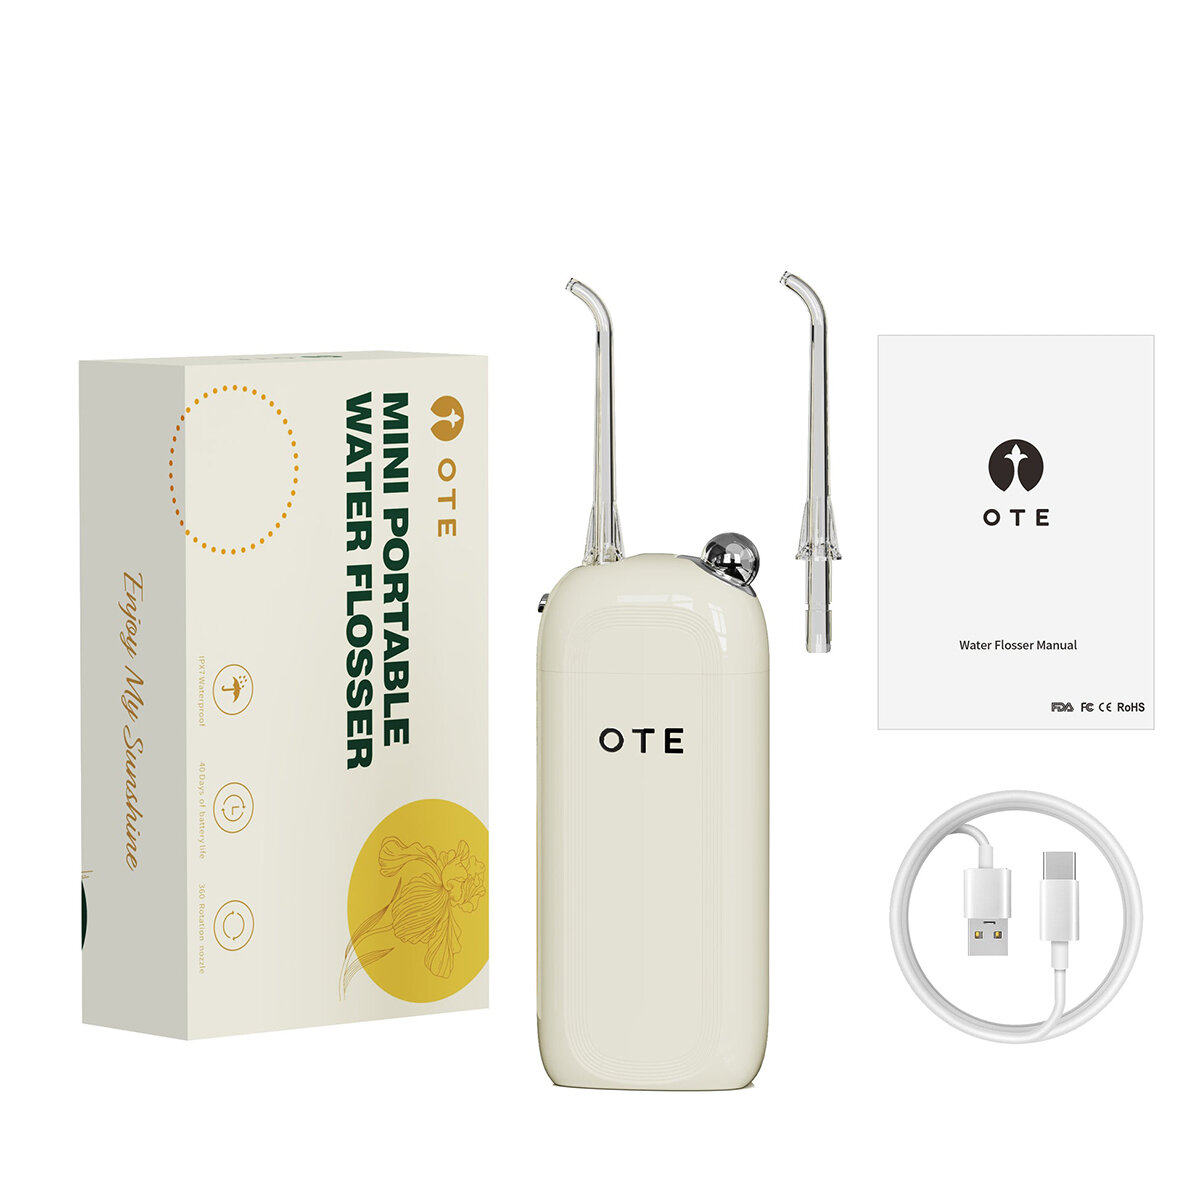 

OTE Portable Water Flosser for Teeth Mini Power Dental Flossers Rechargeable for Travel and Home, 3 Modes & IPX7 Waterpr